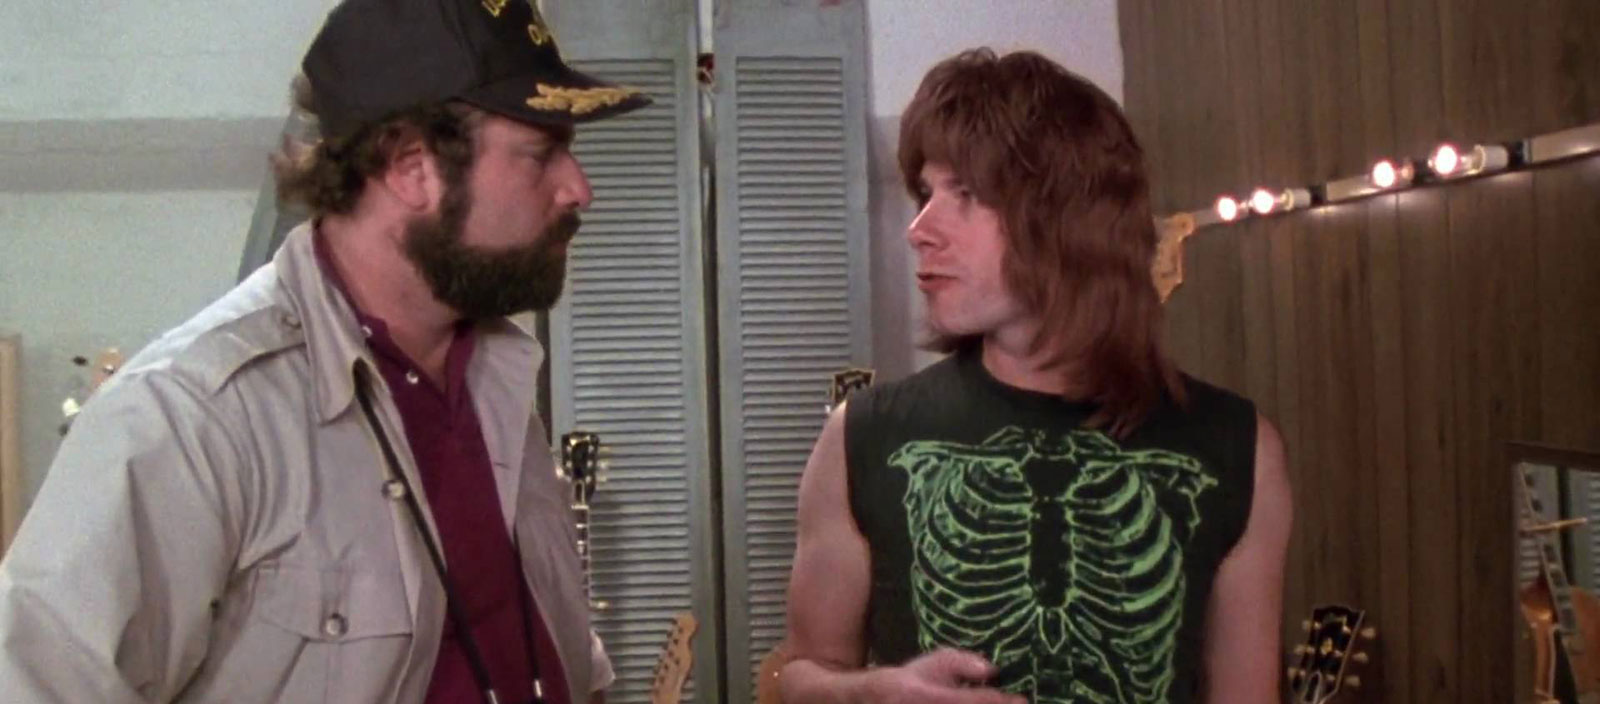 A man wearing a skeleton t-shirt from the movie Spinal Tap